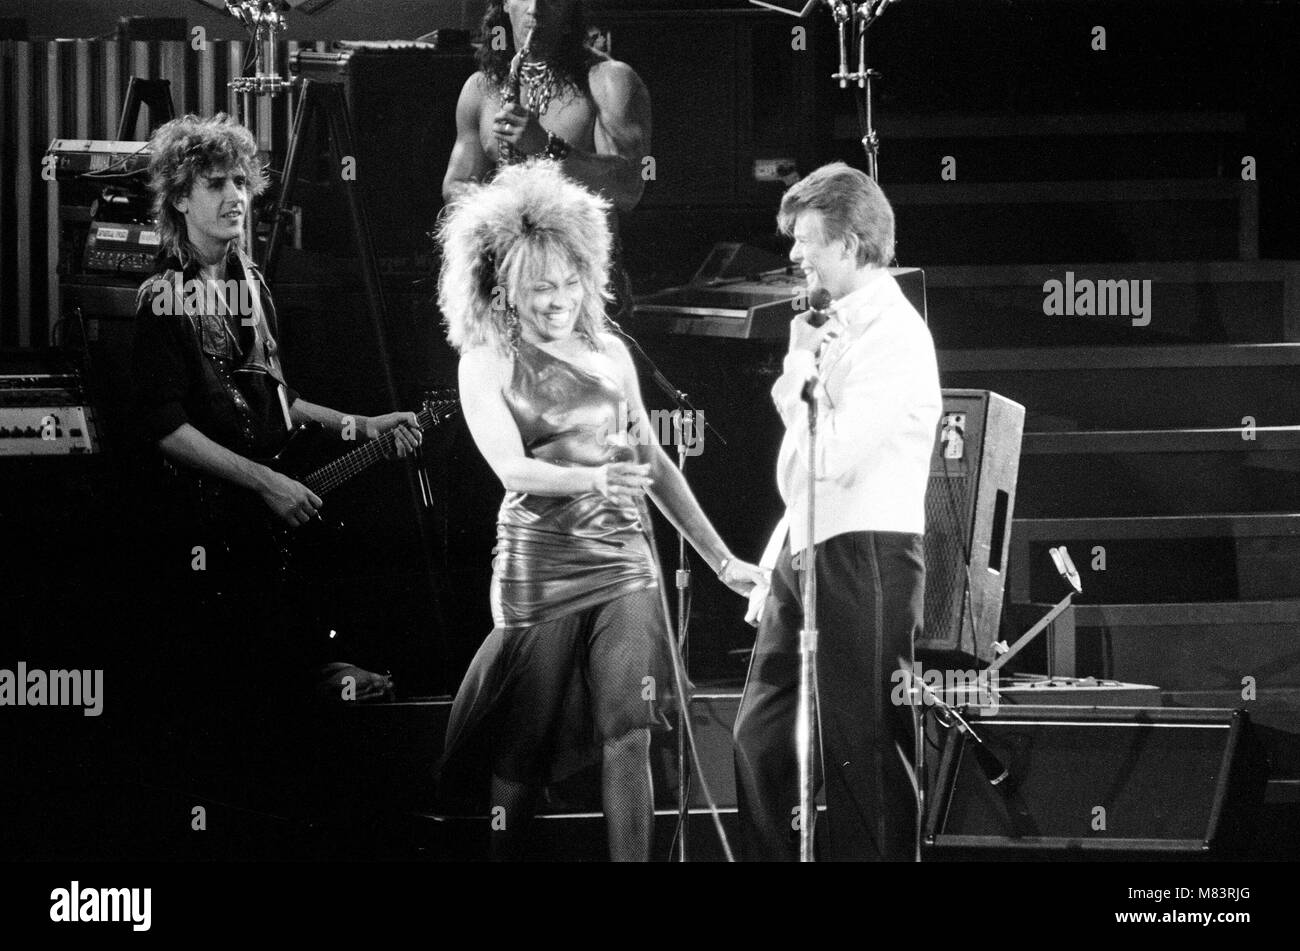 David Bowie and Tina Turner on stage together at the Birmingham NEC.  The concert is part of Tina Turner's Private Dancer Tour. David Bowie joined her late on in the set to duet on 2 of his own songs 'Tonight' and 'Let's Dance'.  Picture taken 23rd March 1985 Stock Photo